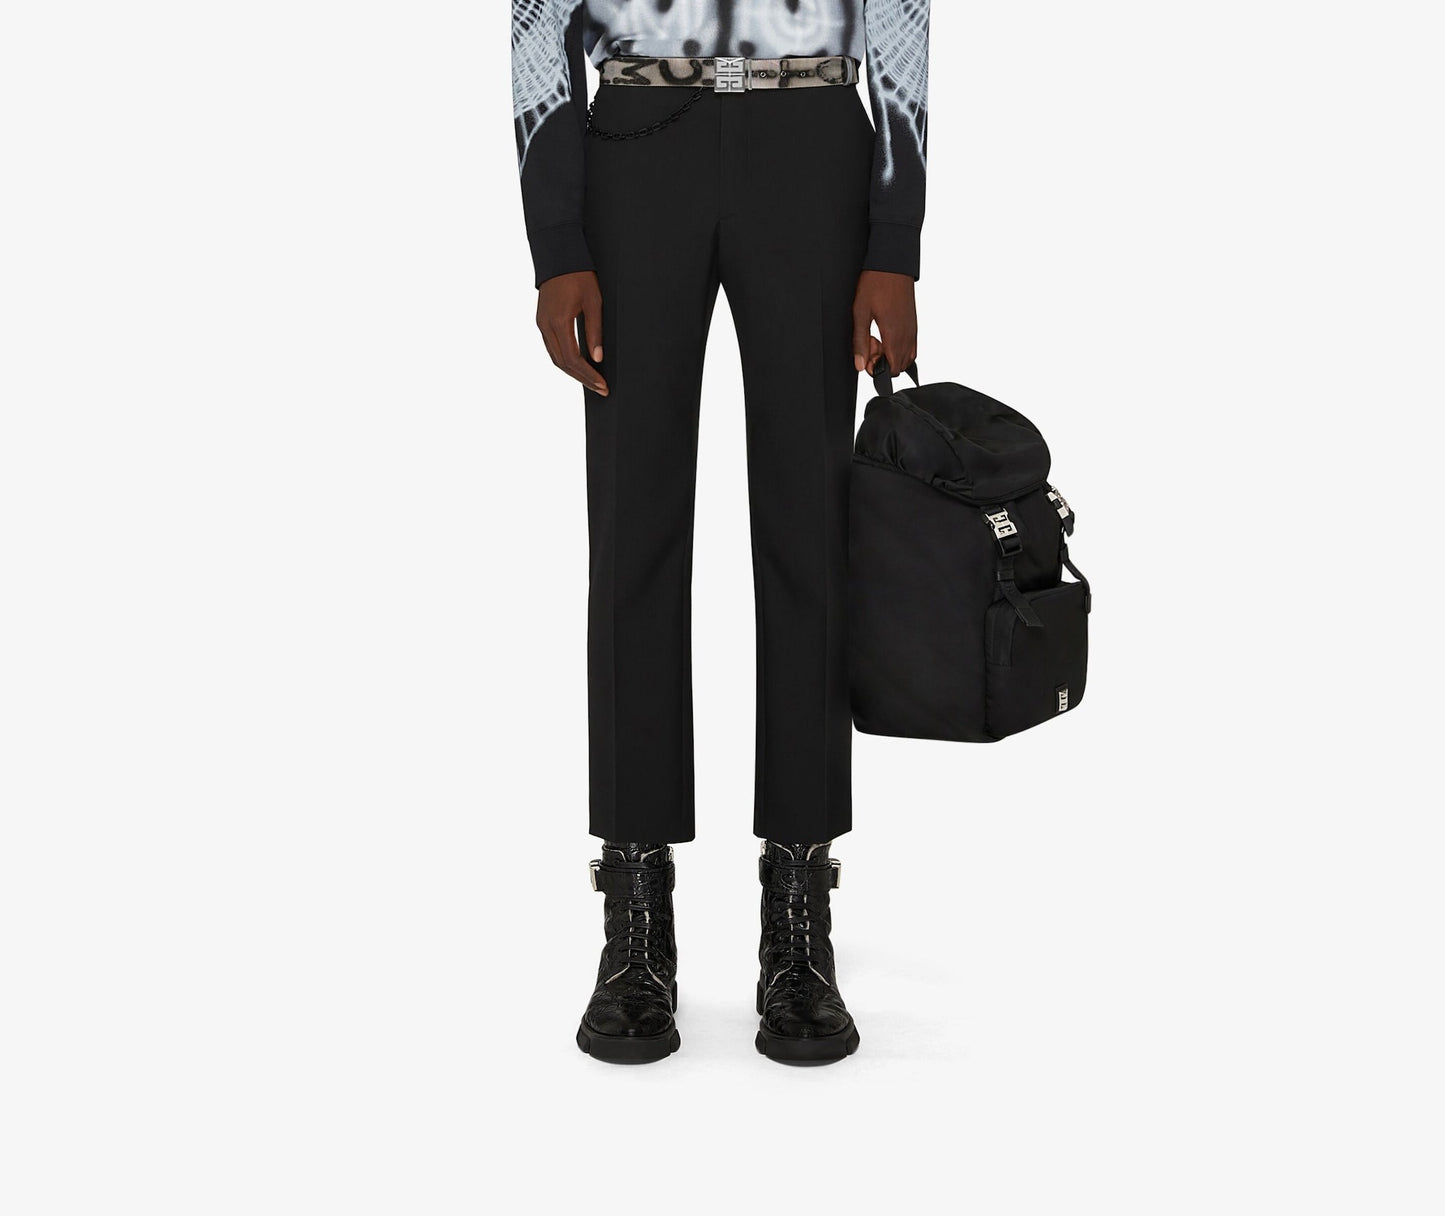 Black Cool Pants With Pockets At the Back